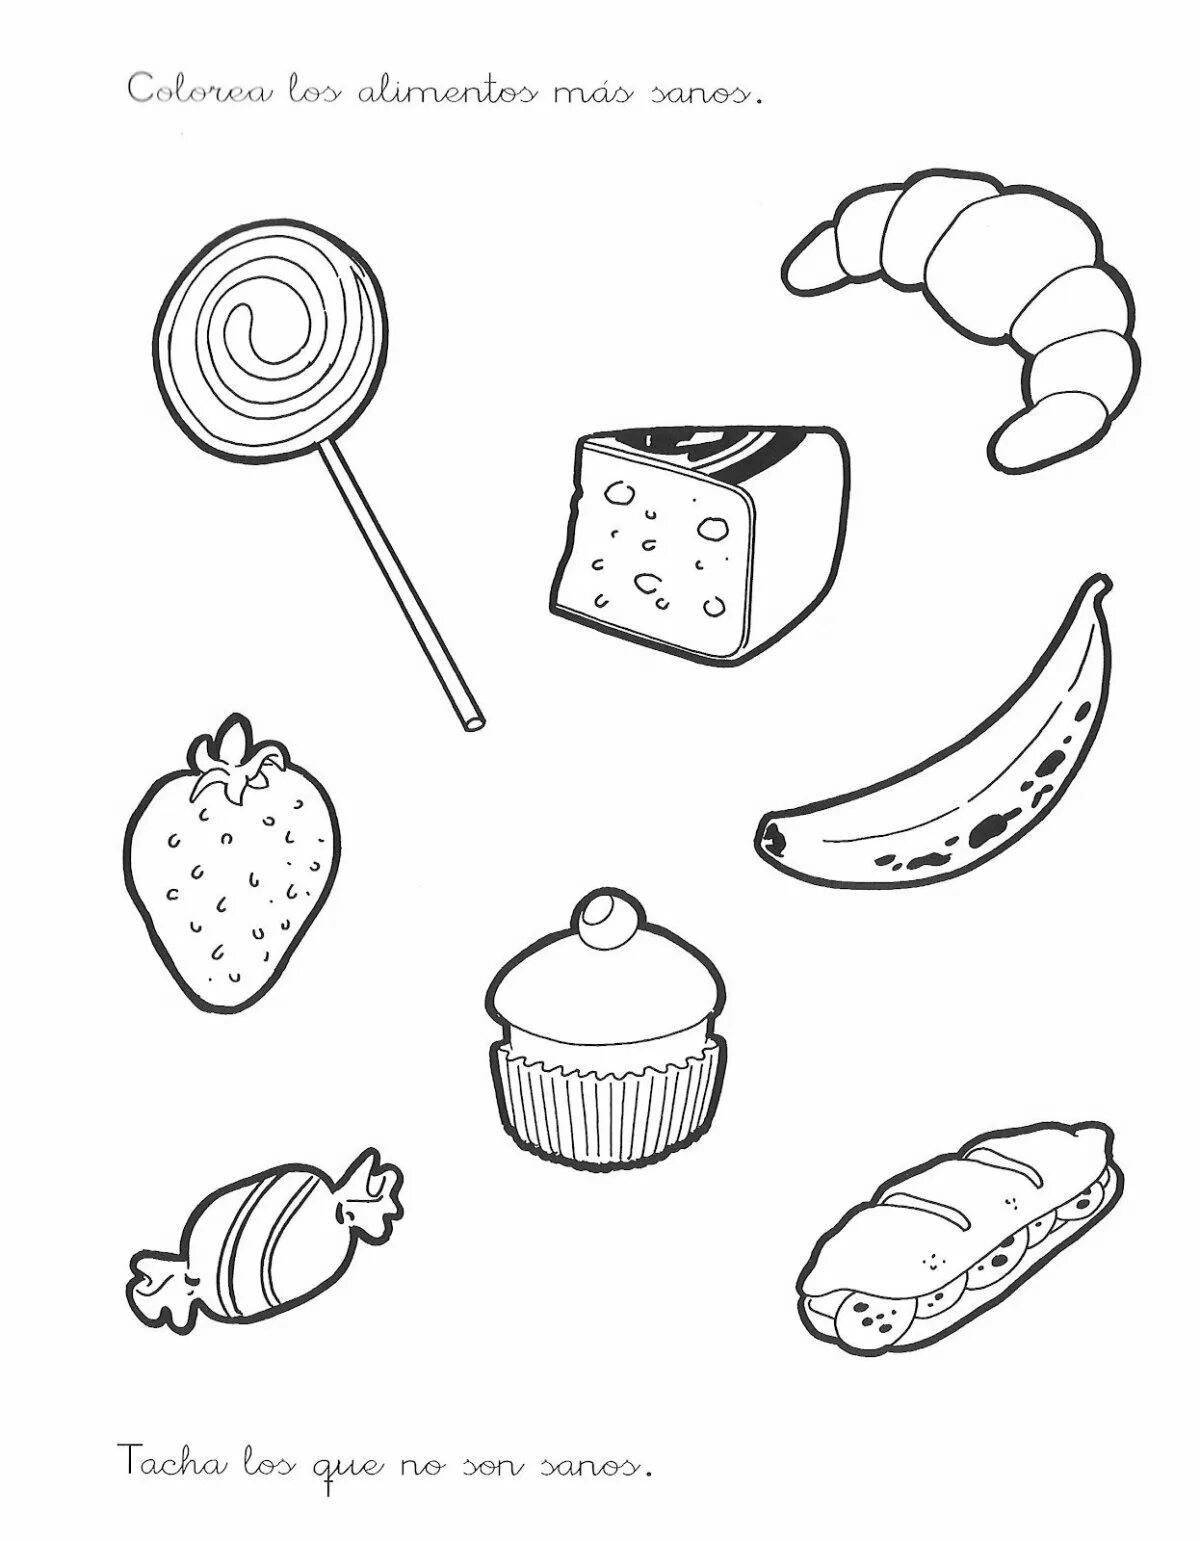 Junk food coloring page